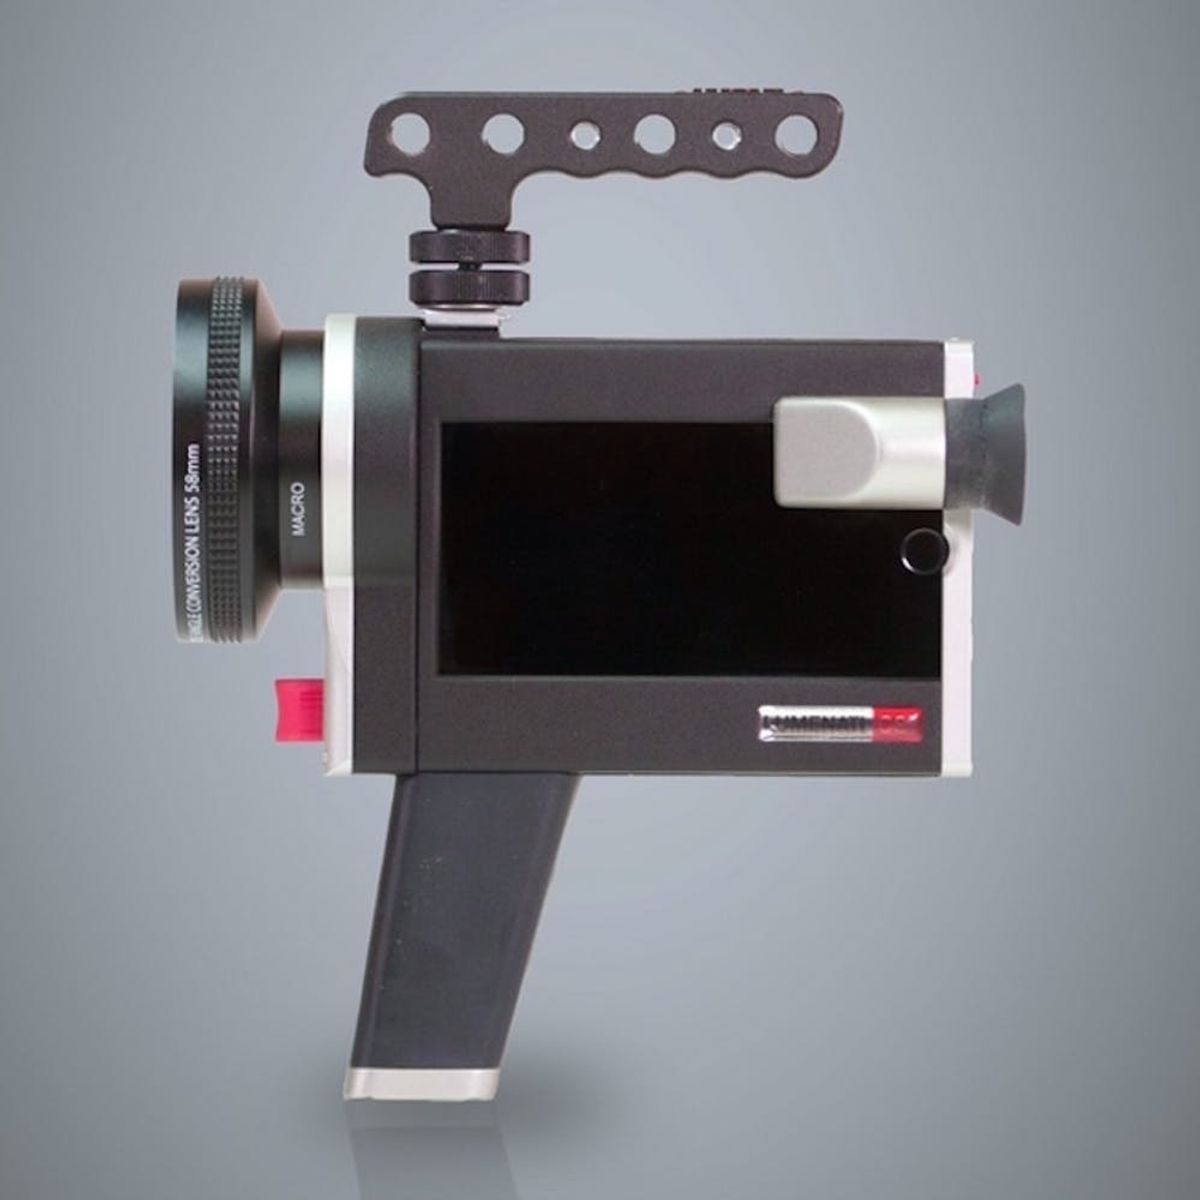 These Crazy Cases Will Transform Your Smartphone into a Movie Camera